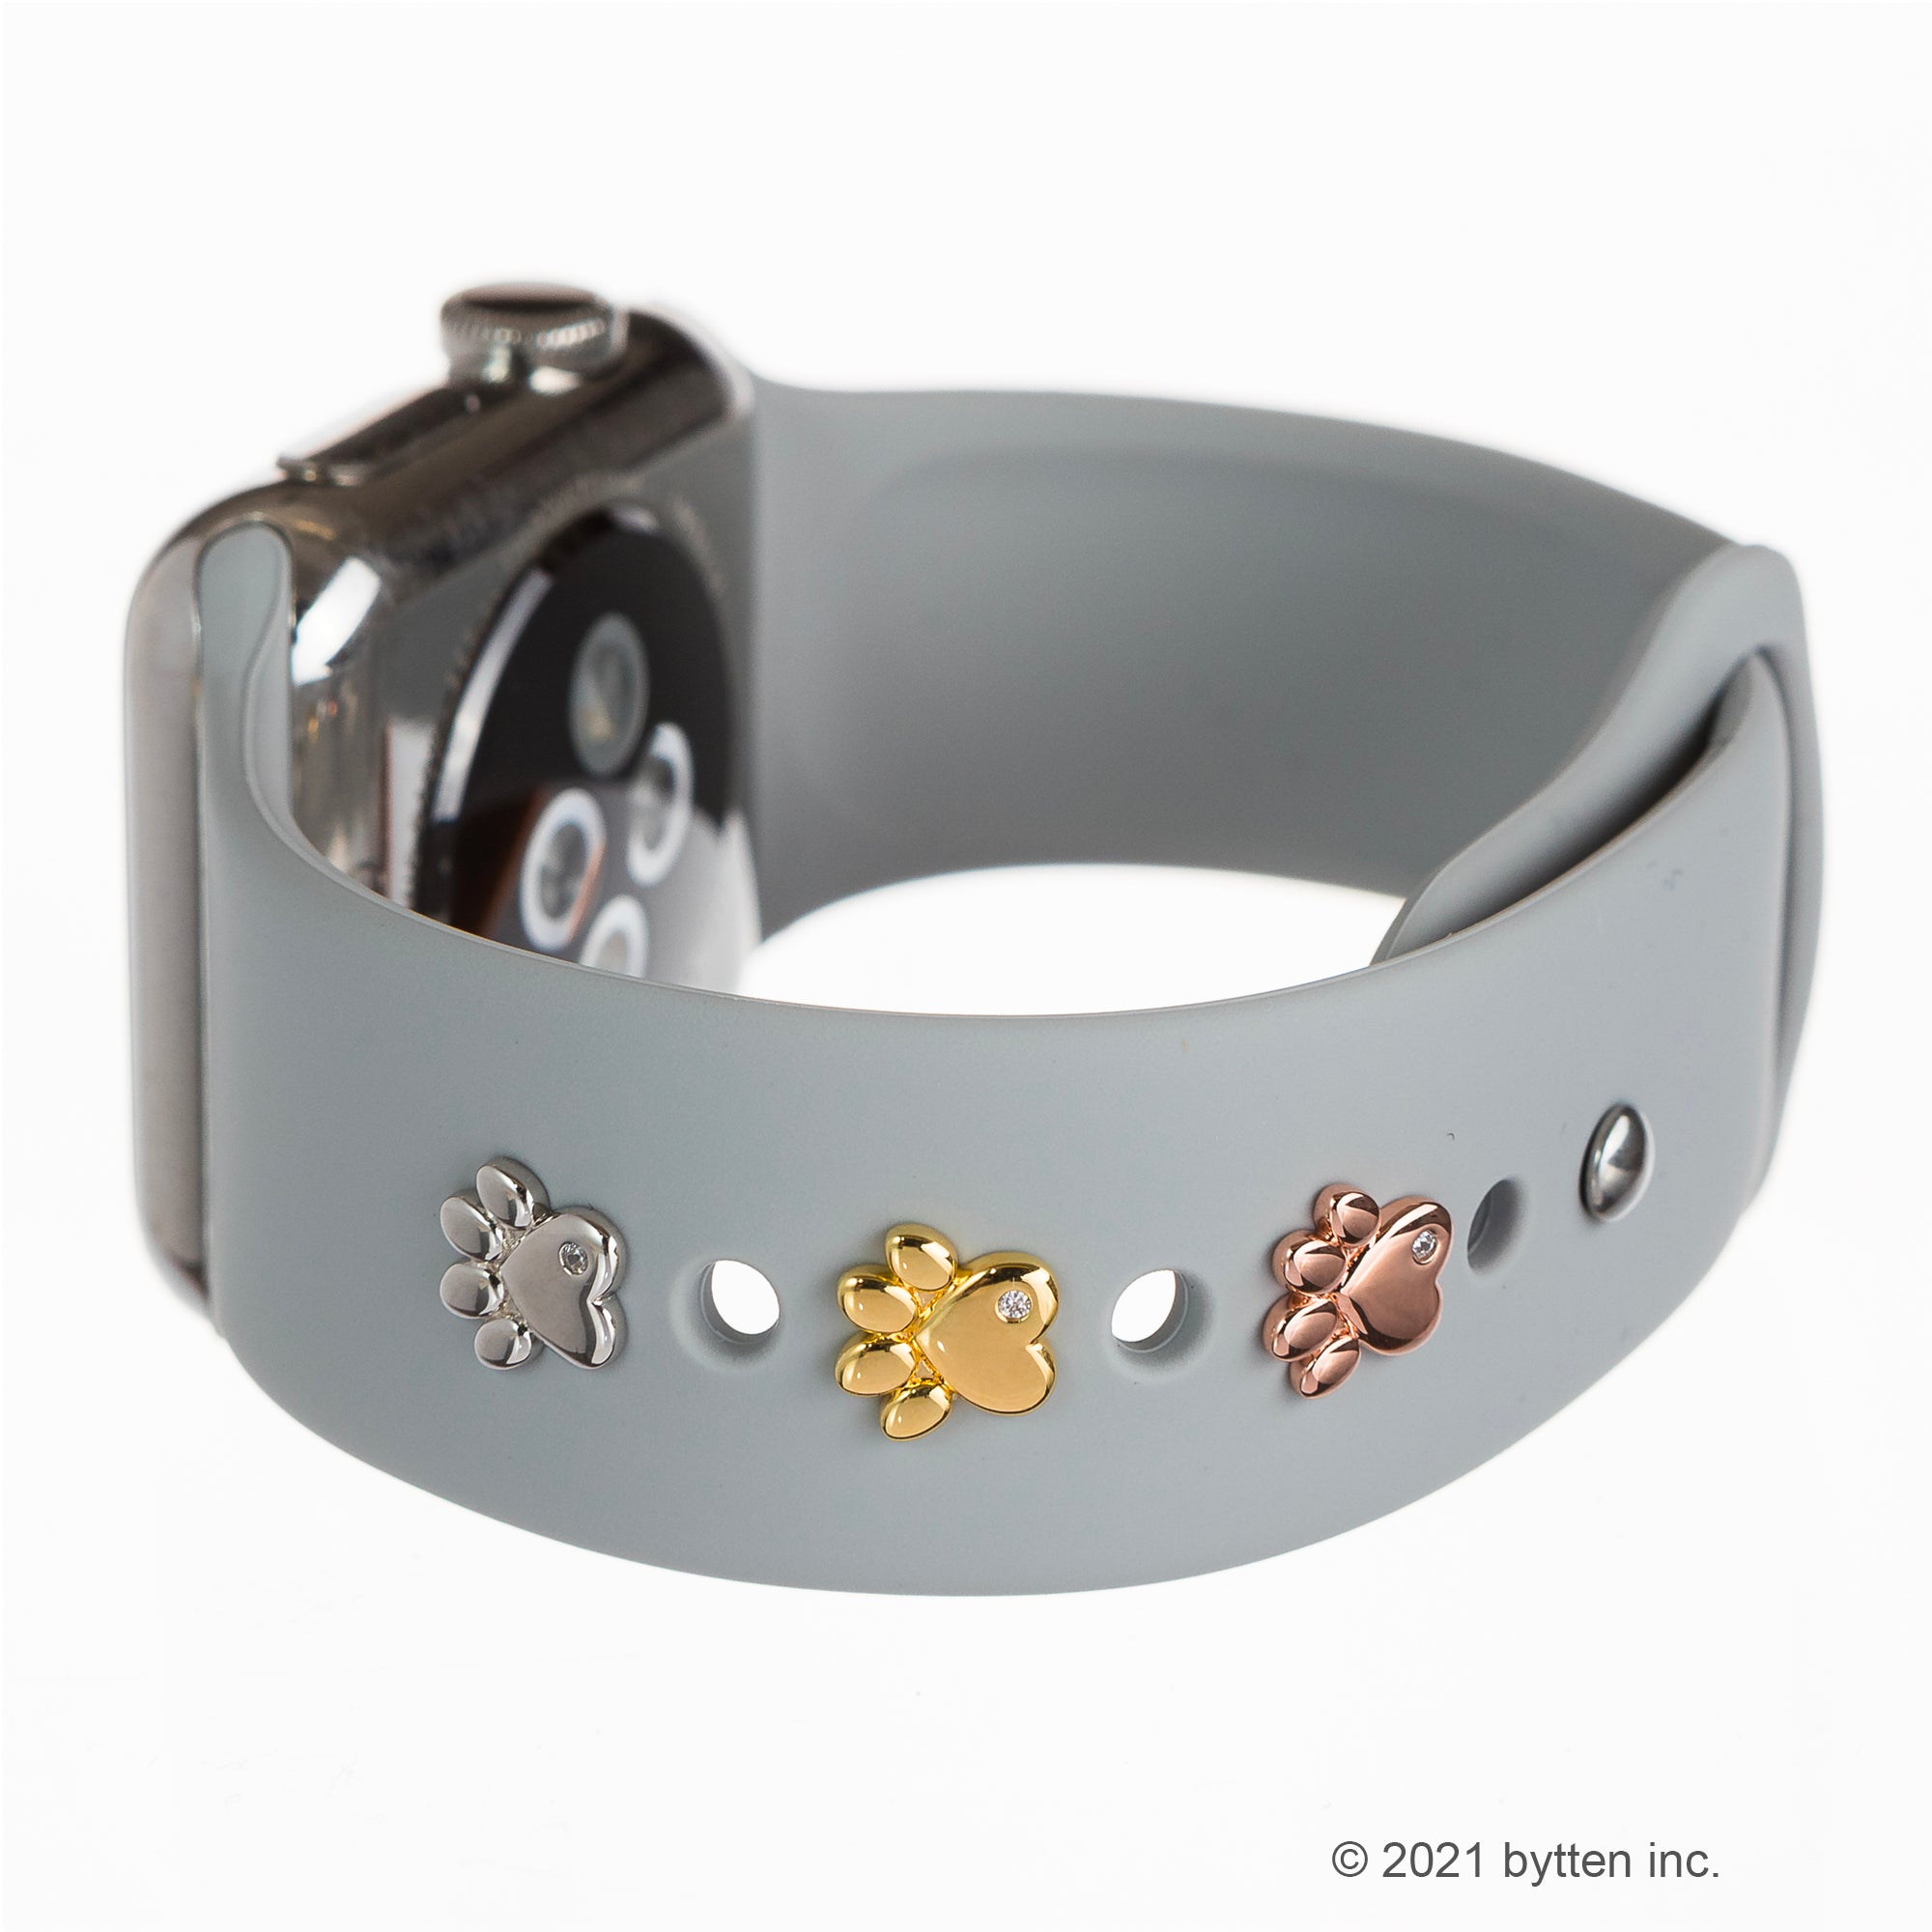 bytten apple watch paw iwatch charms in rose gold, silver and gold